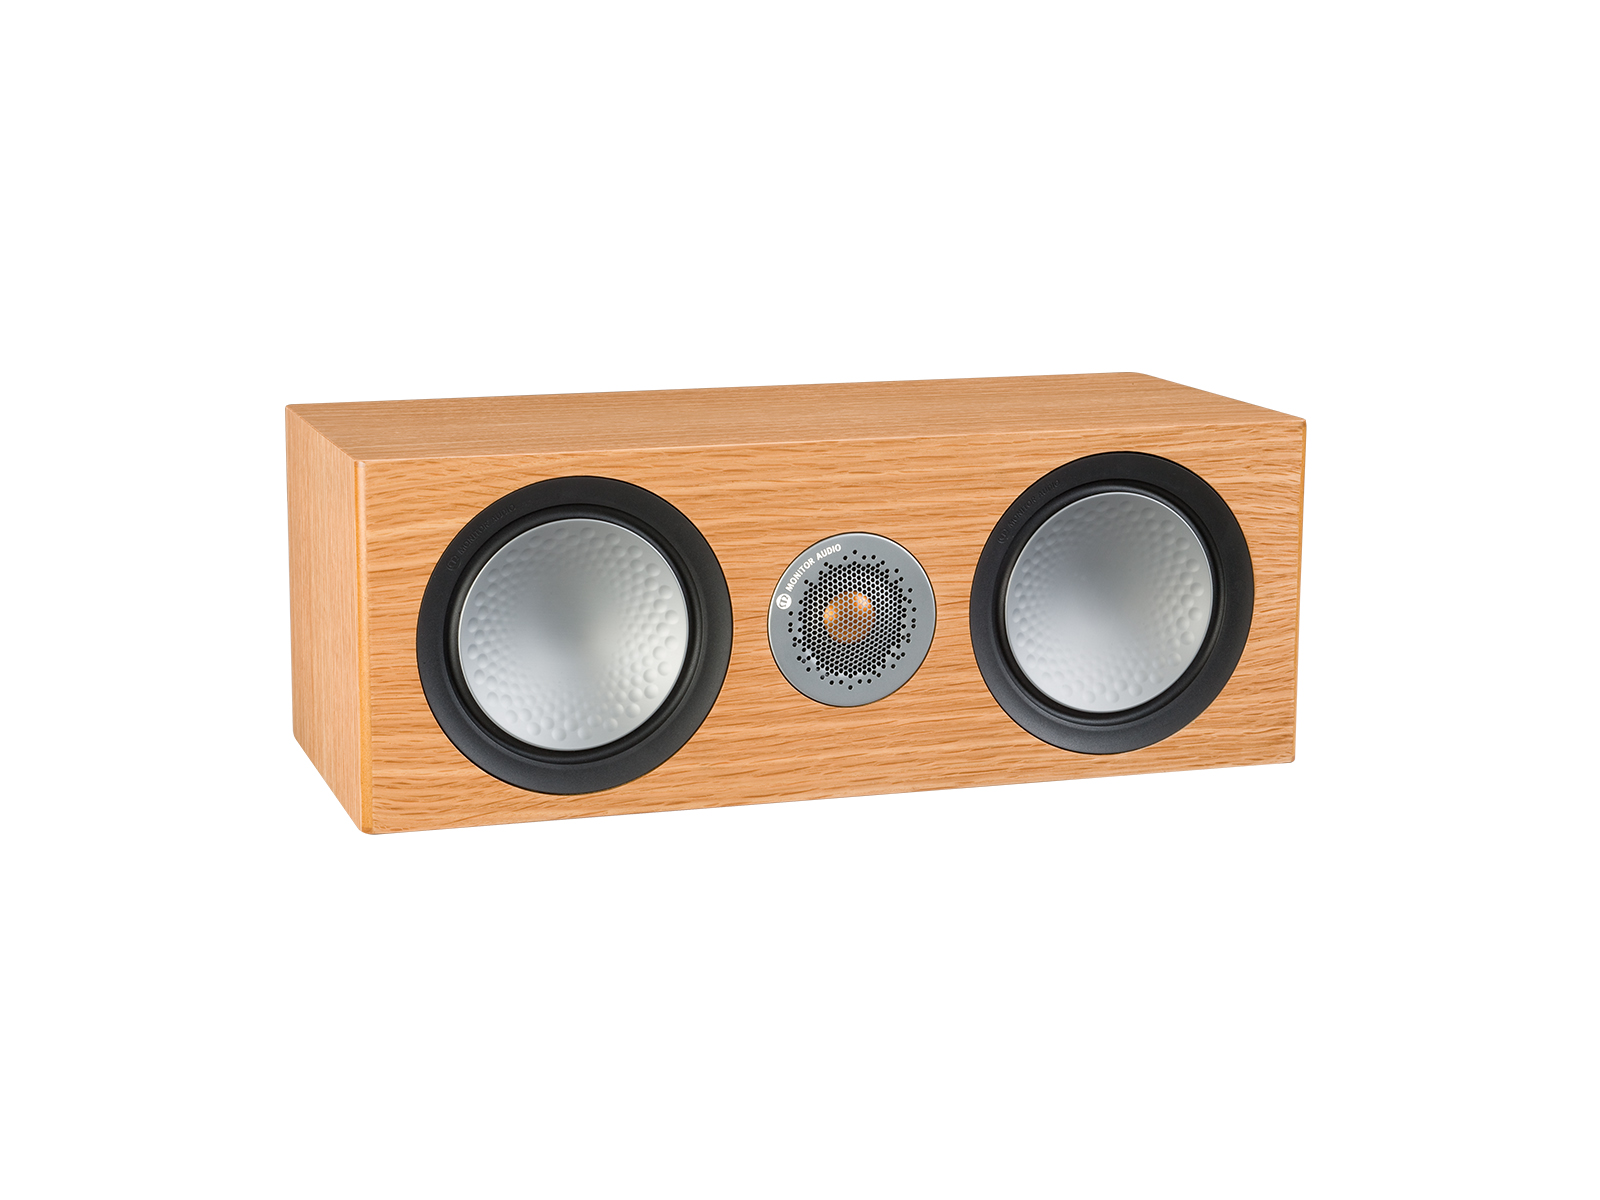 Silver C150, grille-less centre channel speakers, with a natural oak finish.